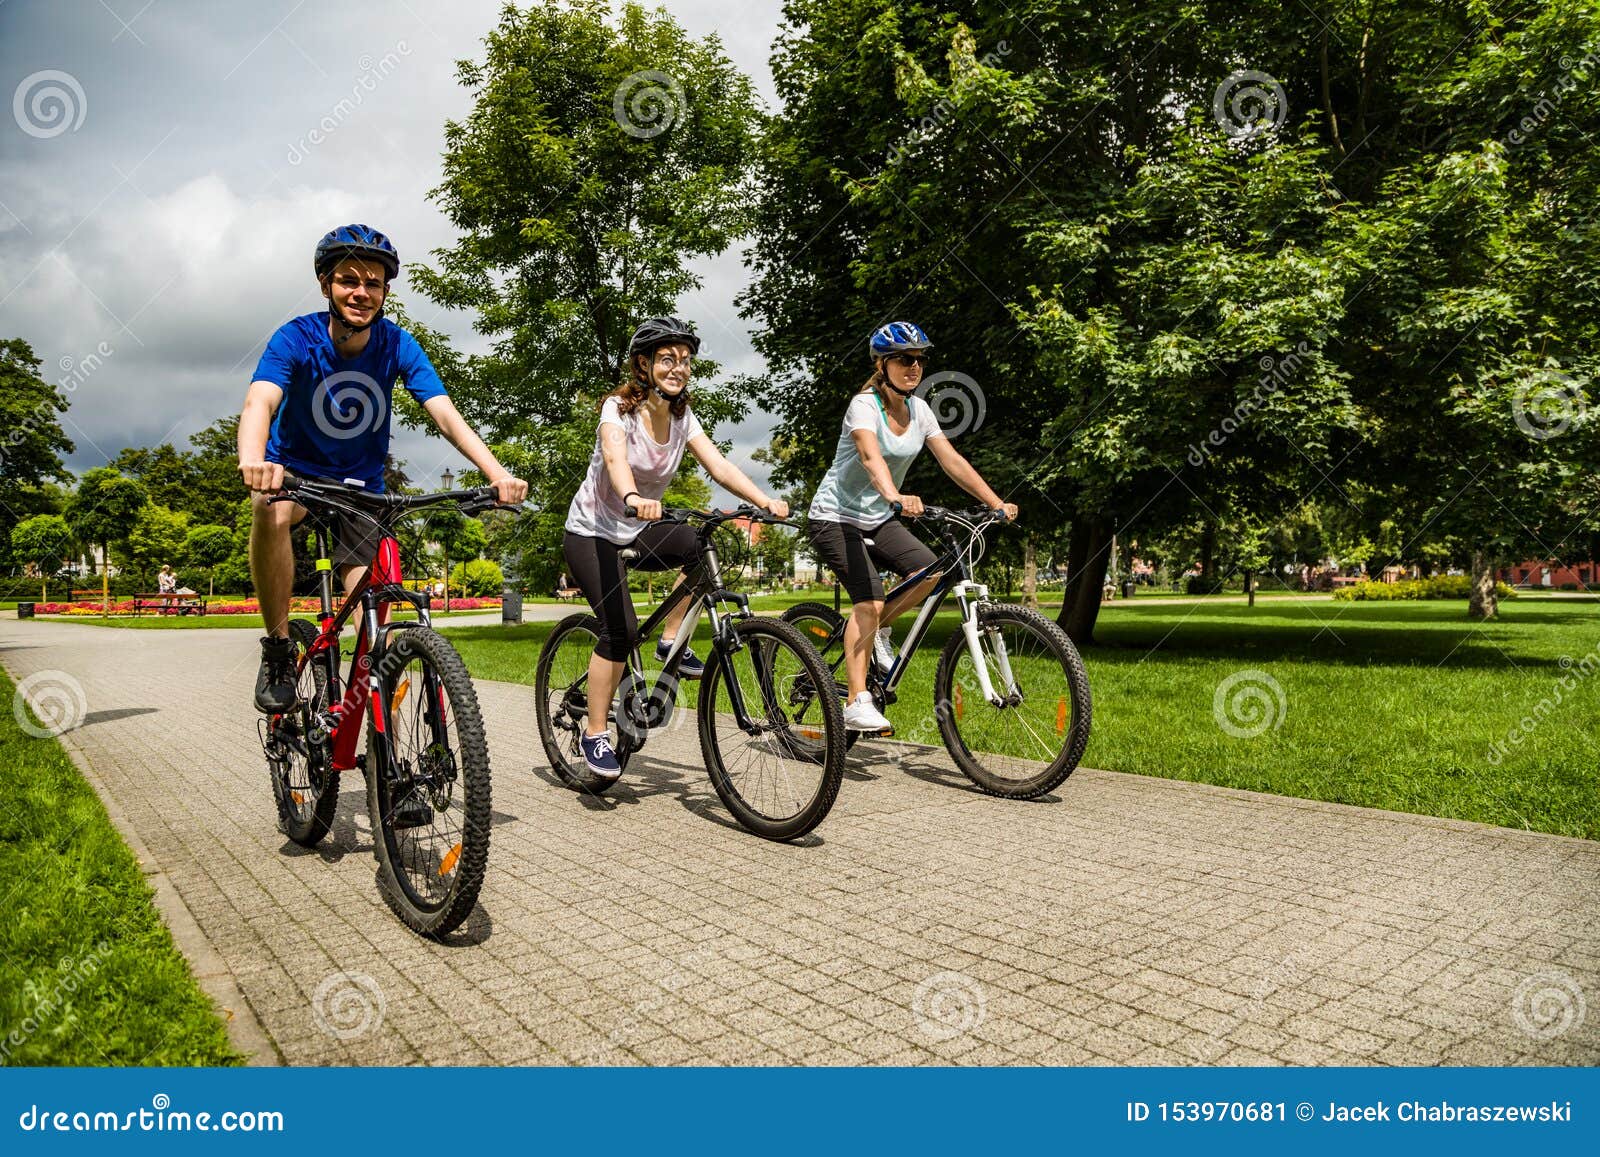 Healthy Lifestyle People Riding Bicycles In City Park Stock Image Image Of Lifestyle Group